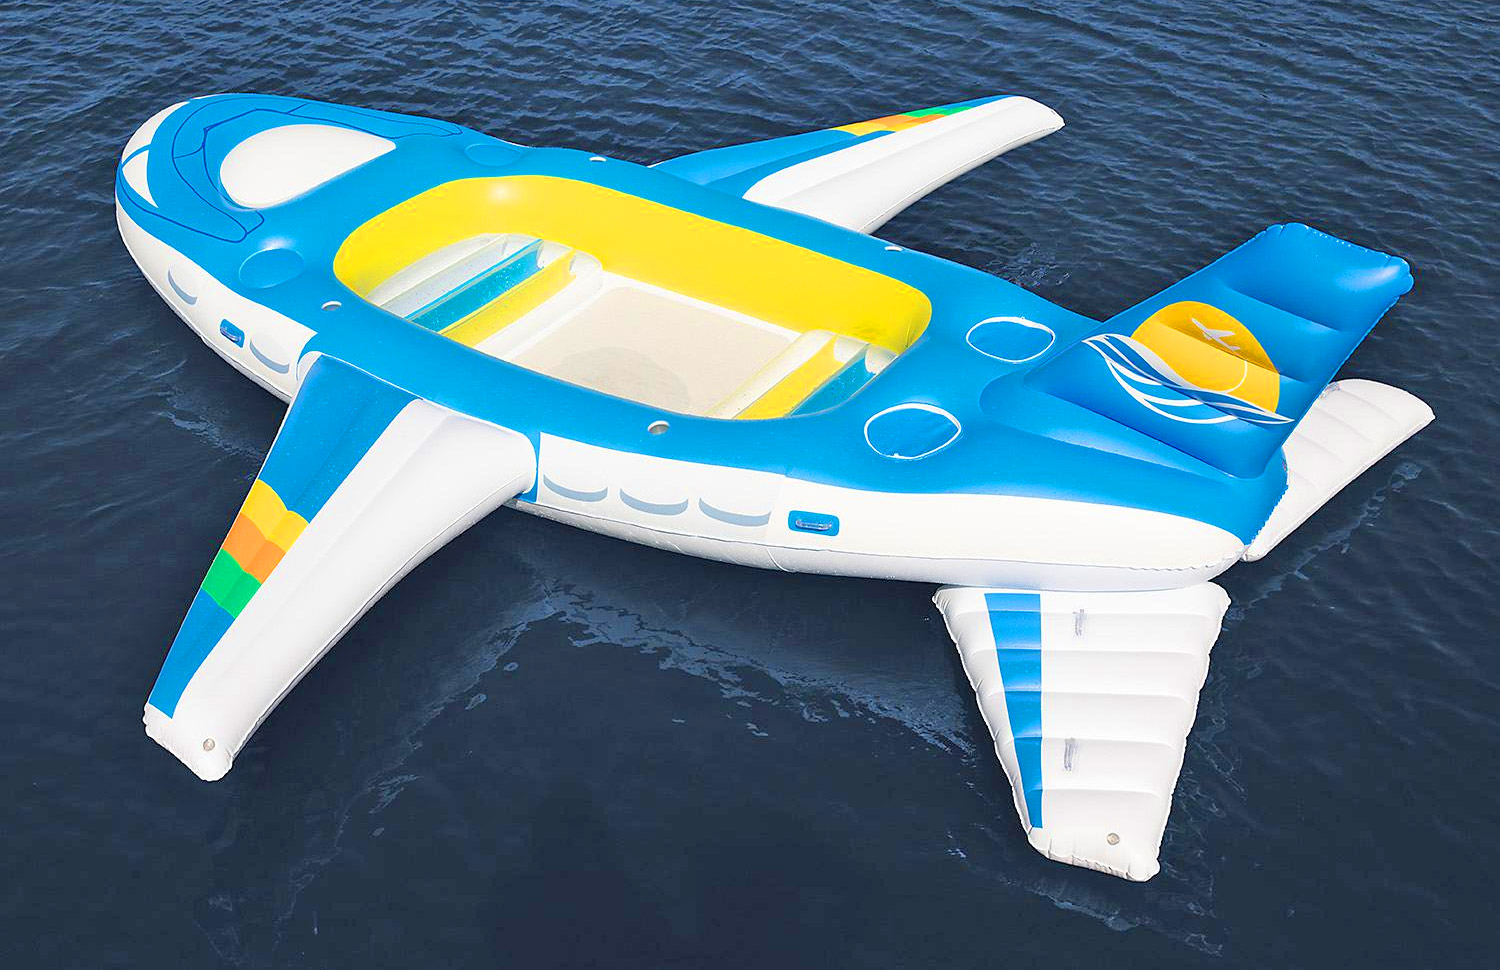 Giant 18-Foot Airplane Lake Float - Inflatable Private jet lake float